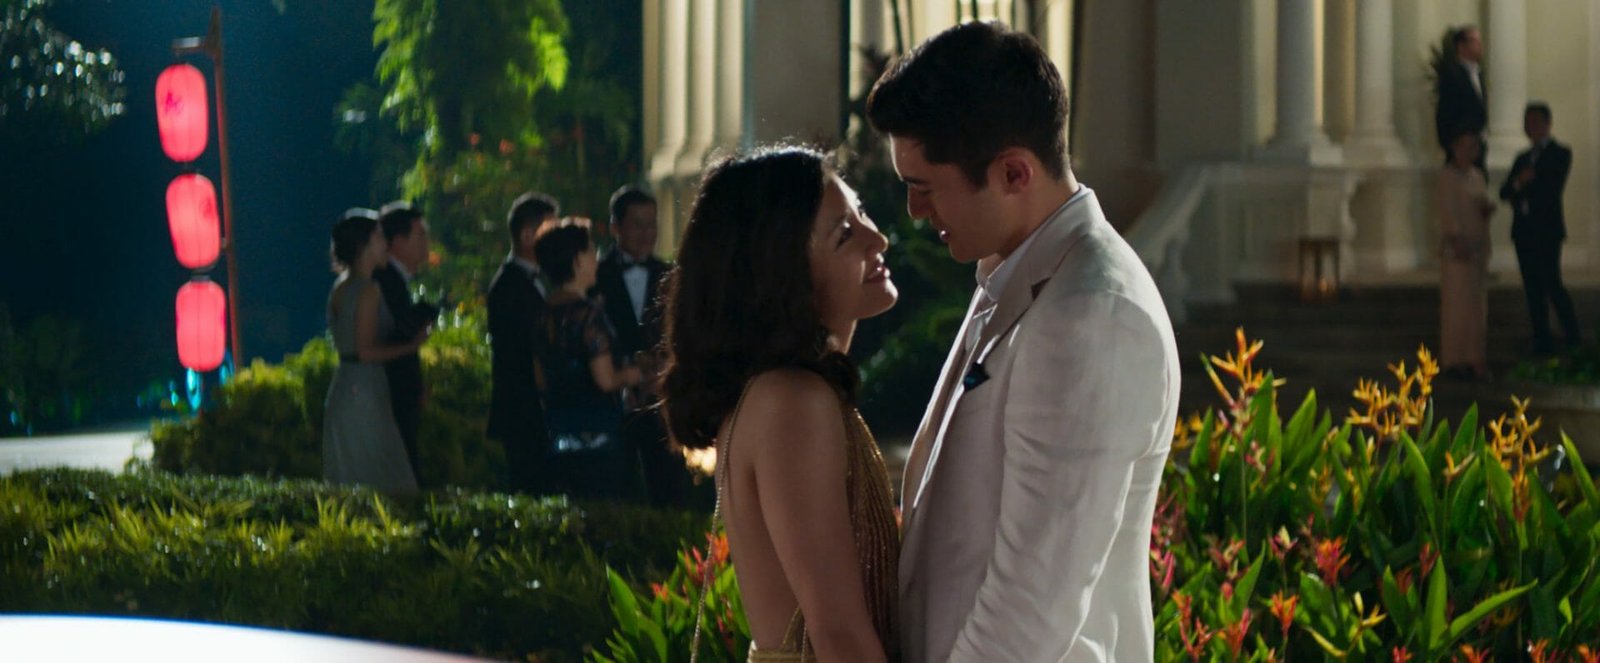 Best Romance On HBO Max: Crazy Rich Asians (2018)